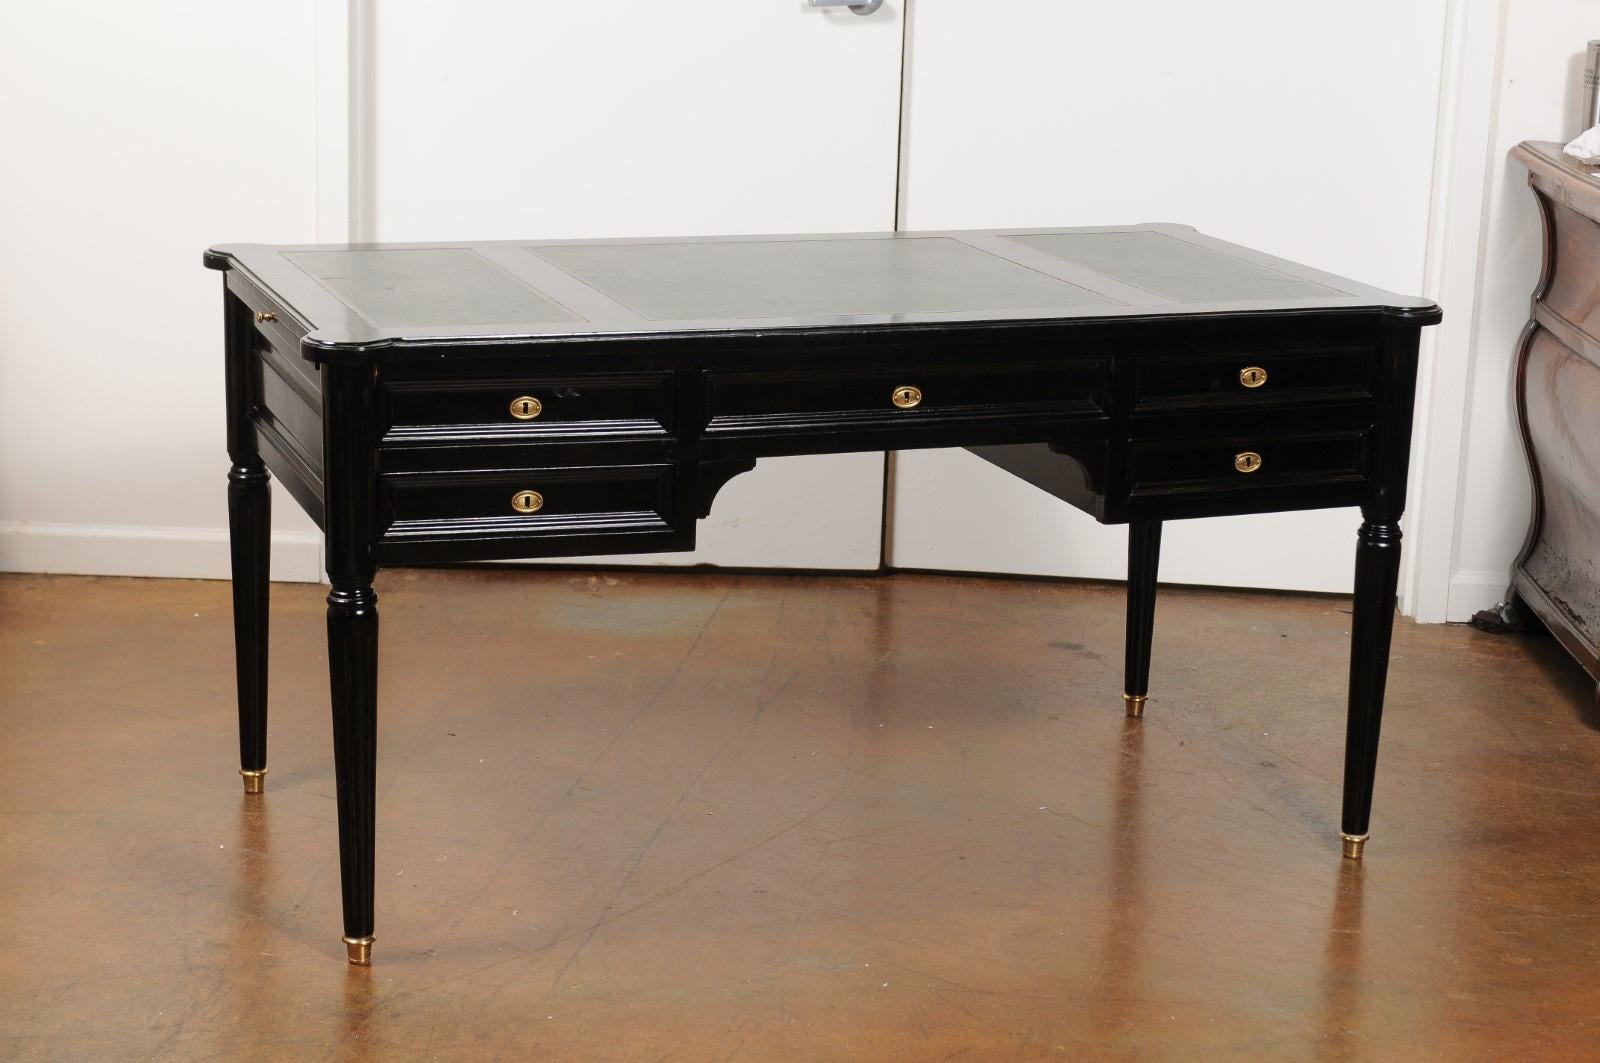 A French Directoire style ebonized wood five-drawer desk from the mid-20th century, with green leather writing surface, brass accents and fluted legs. Born in France during the midcentury period, this exquisite desk features a rectangular top with